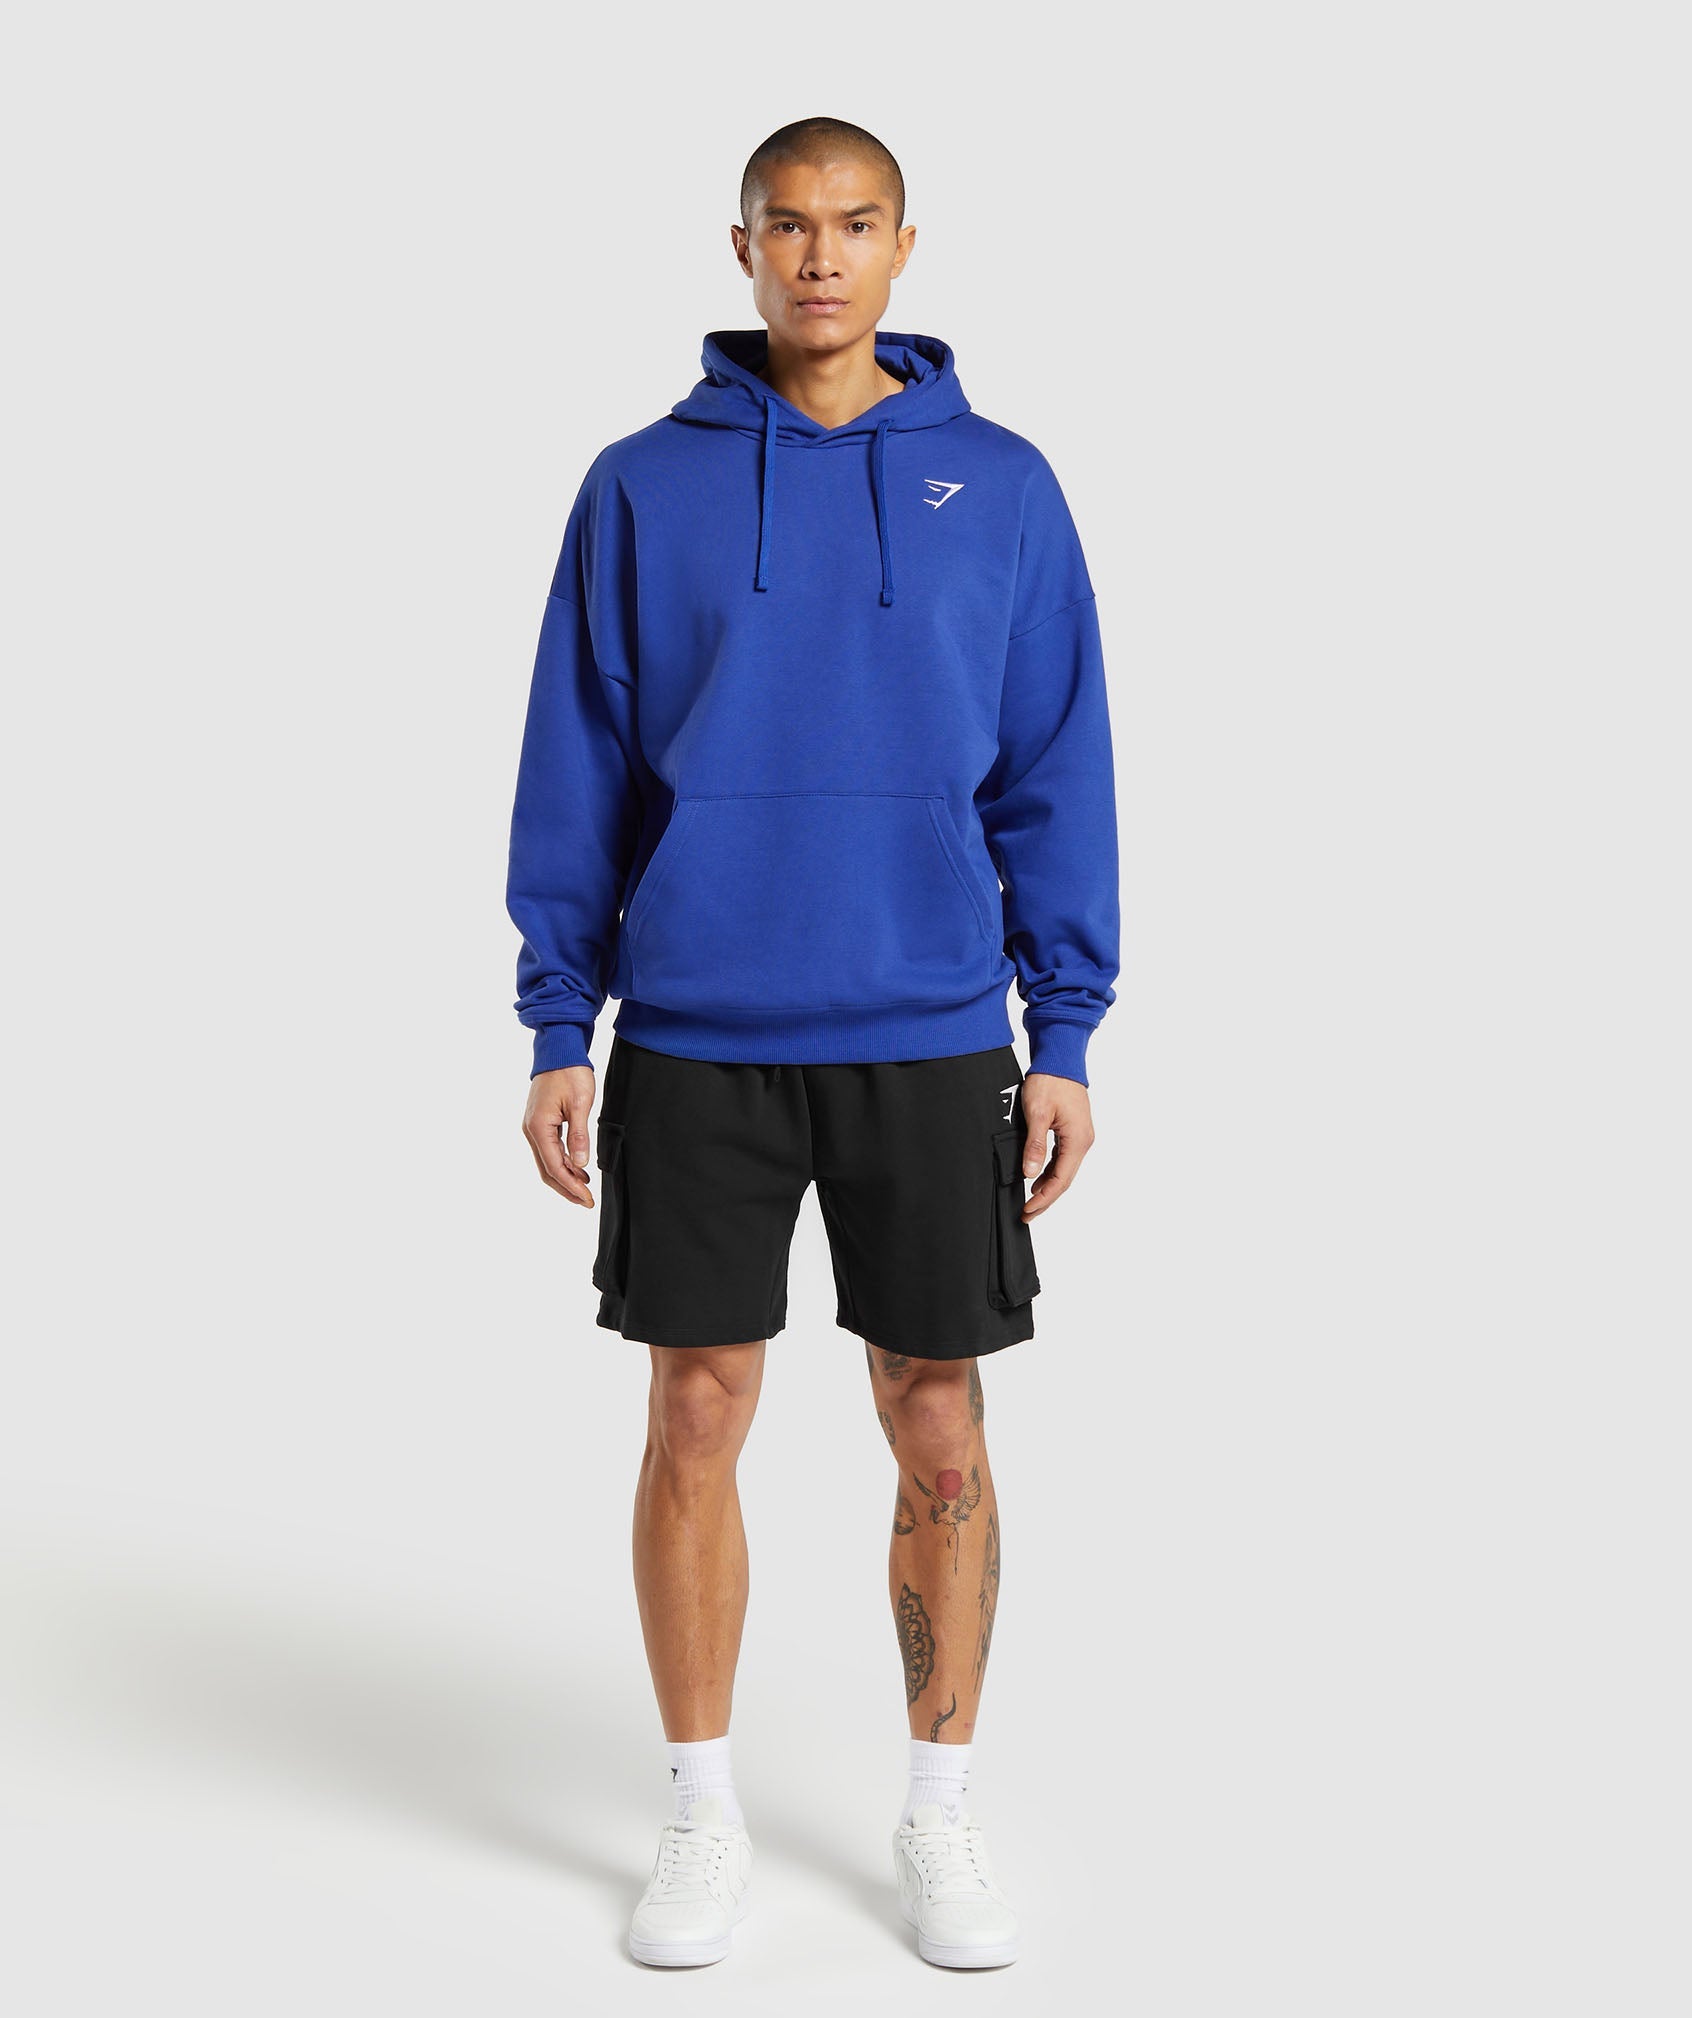 Crest Oversized Hoodie in Wave Blue - view 4